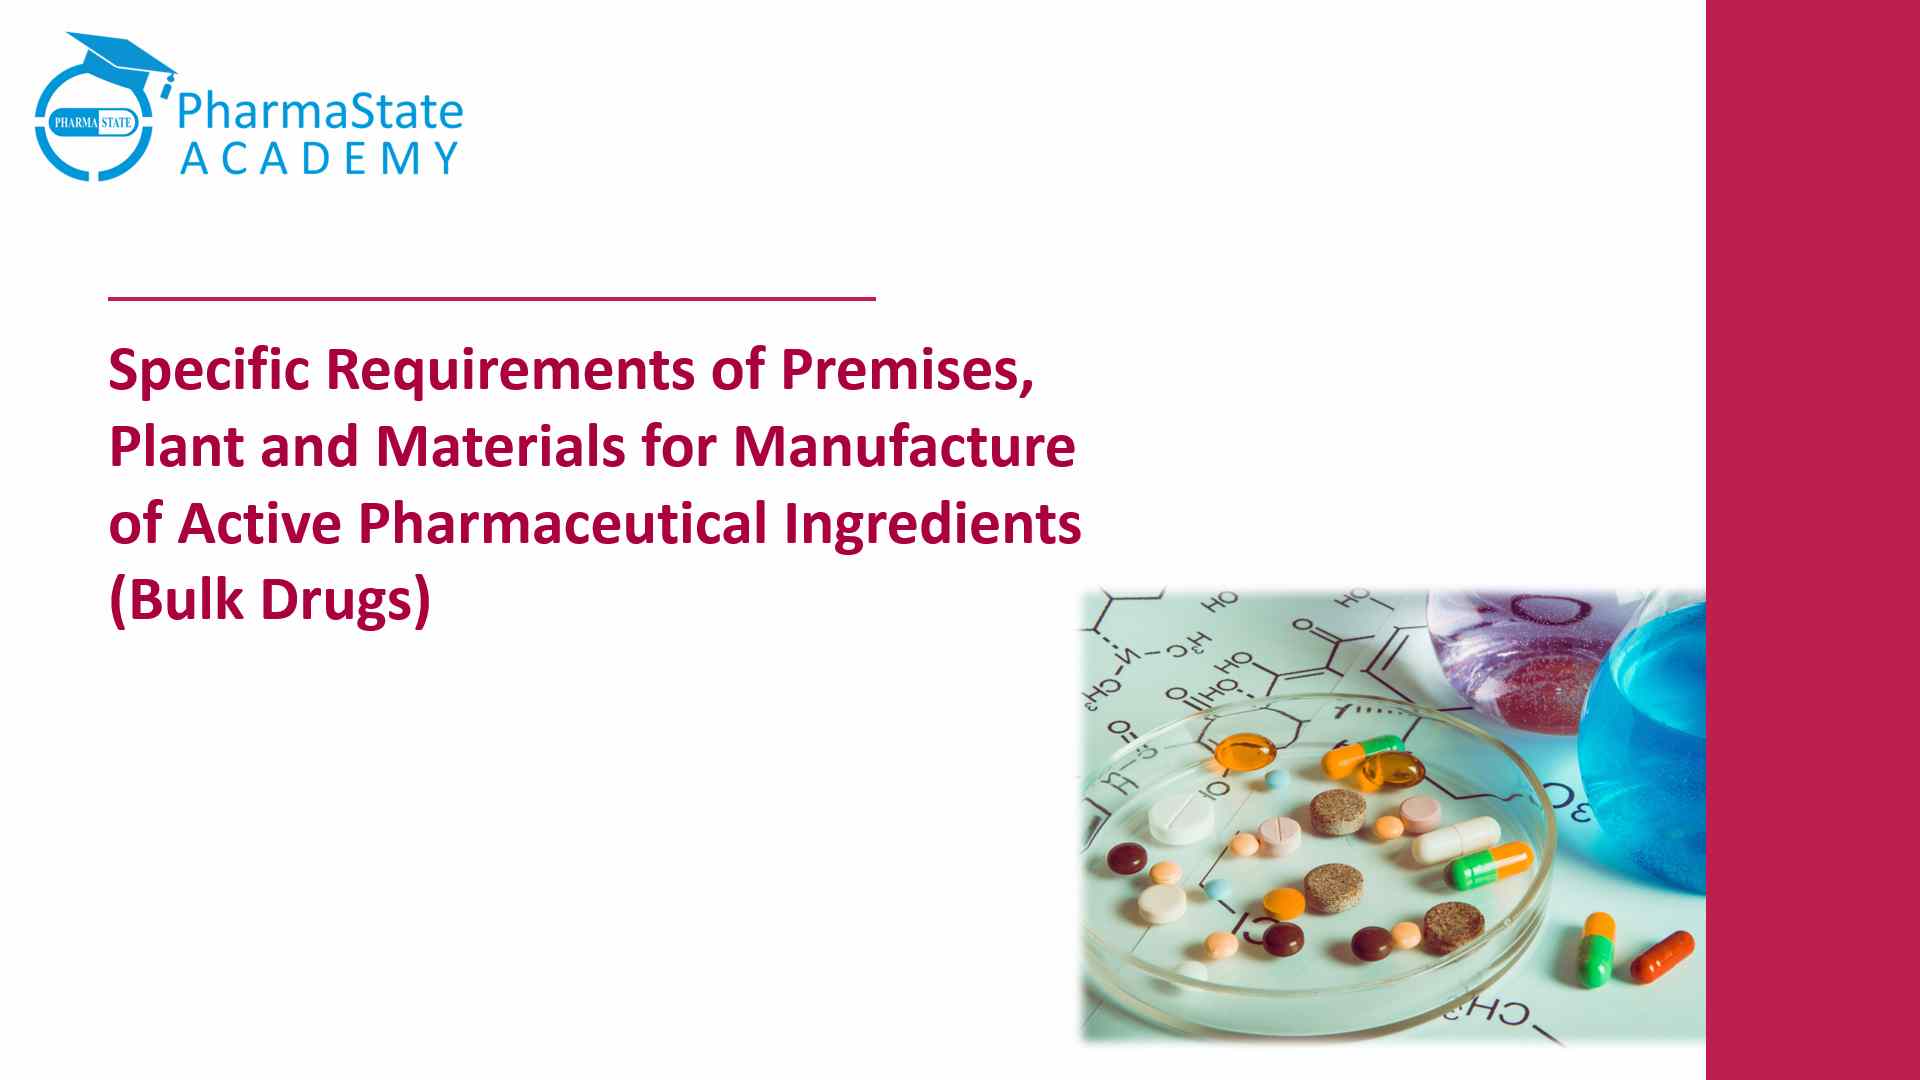 Specific Requirements of Premises, Plant and Materials for Manufacture of Active Pharmaceutical Ingredients (Bulk Drugs)